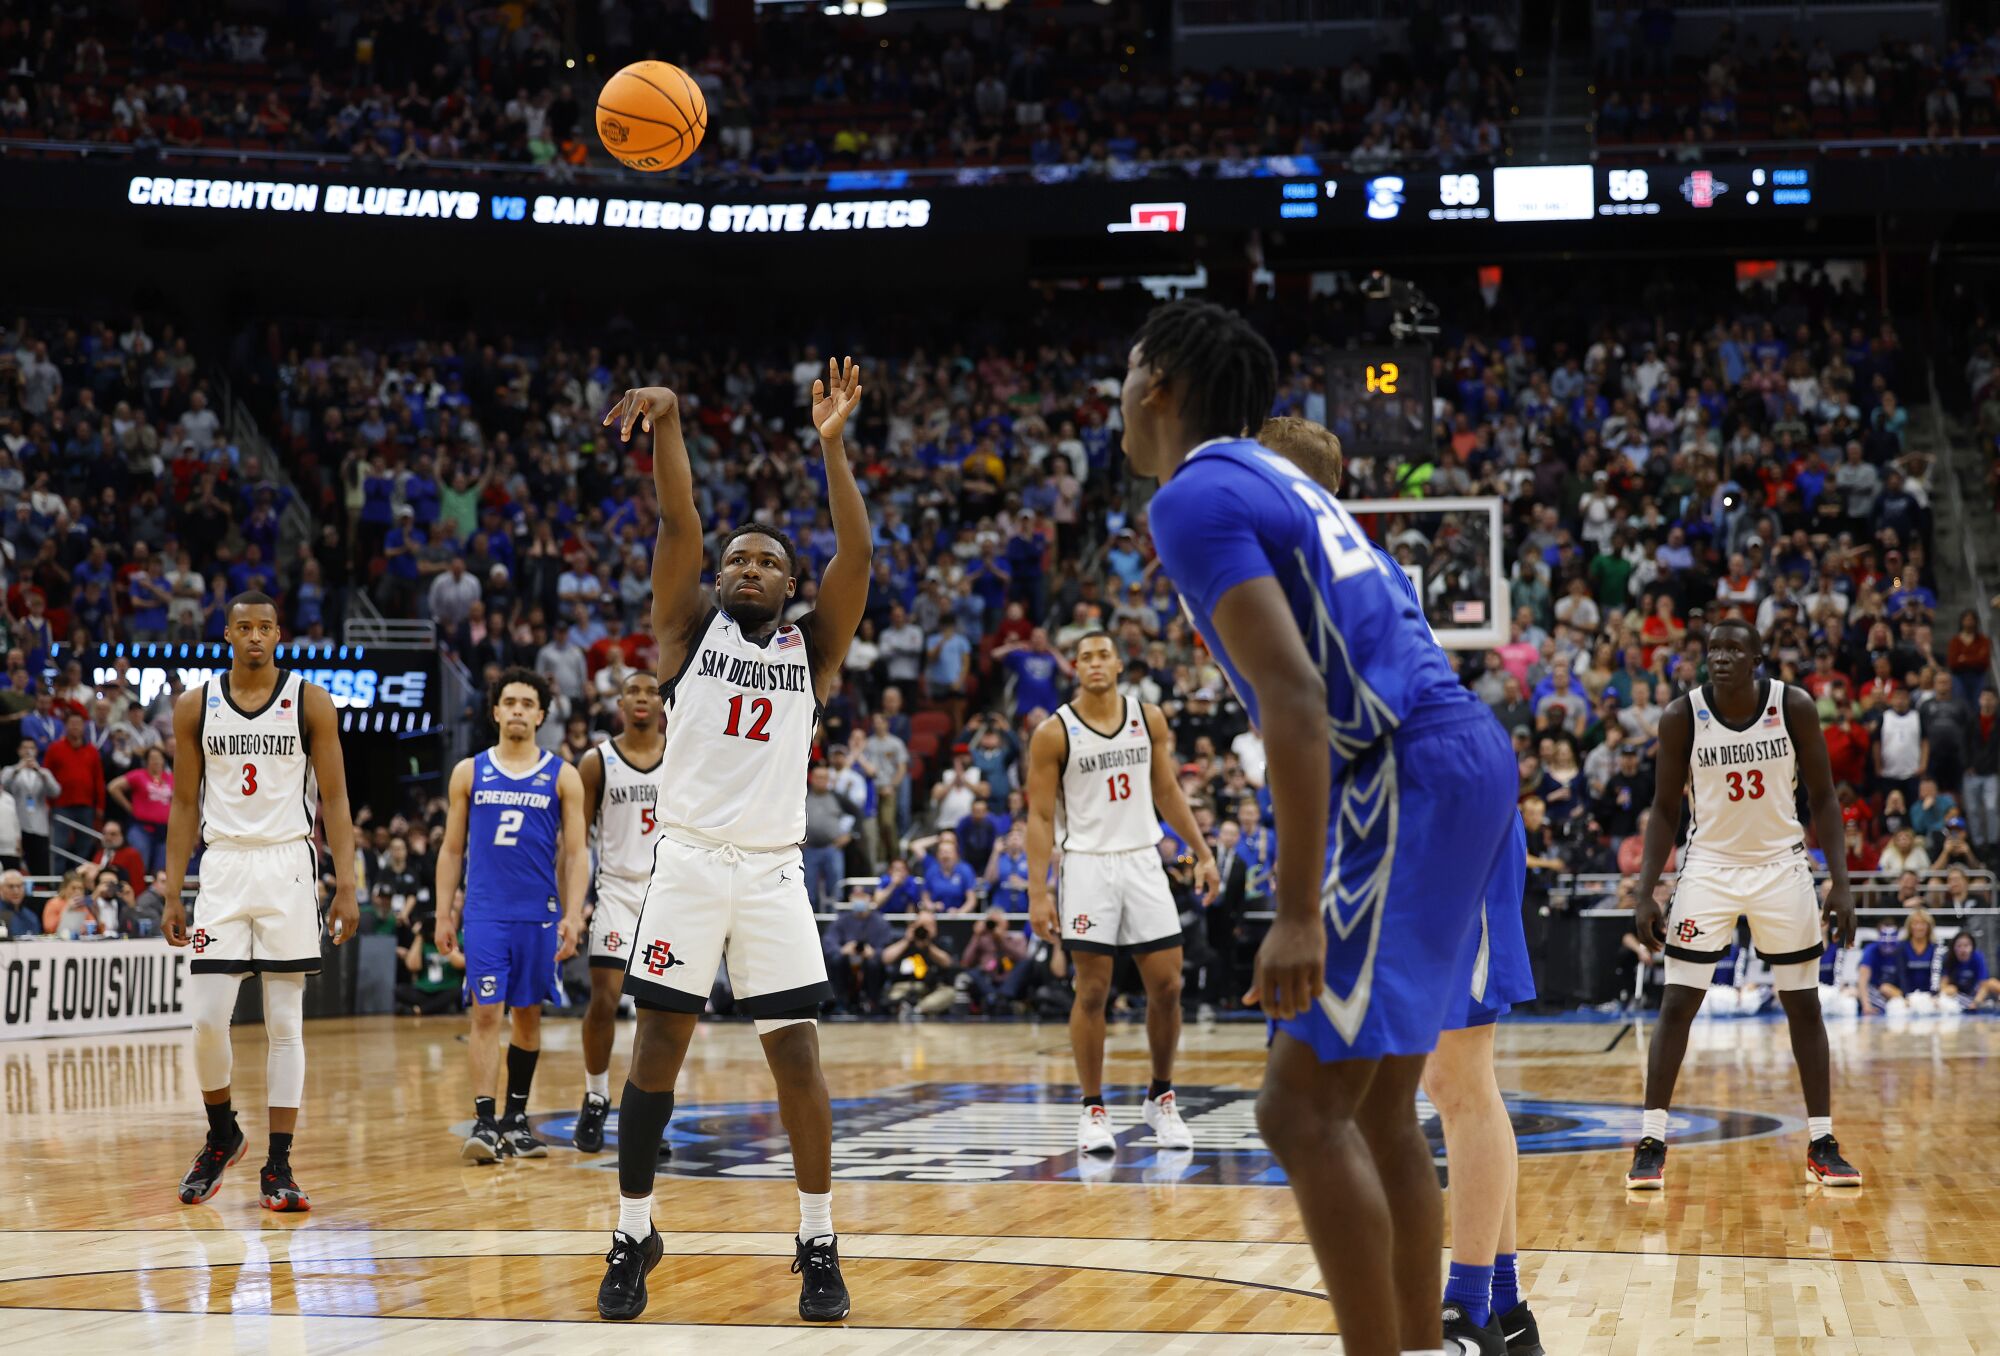 San Diego State's Darrion Trammell makes the game-winning free throw to beat Creighton 57-56.